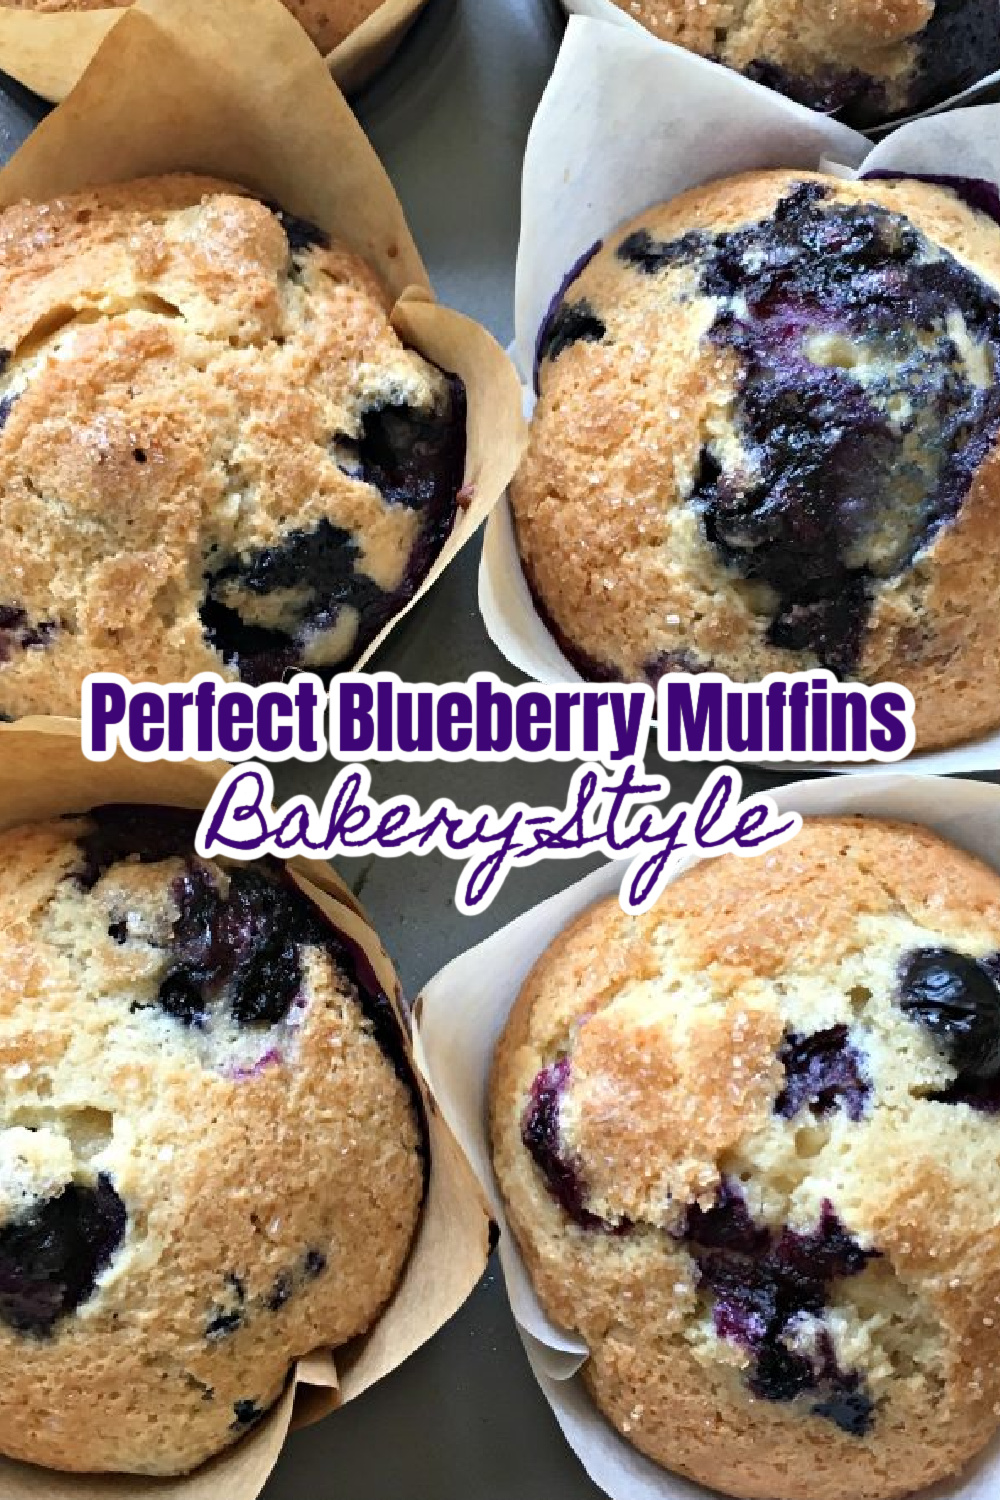 Photo of 4 blueberry muffins after baking - by Sweet Little Bluebird